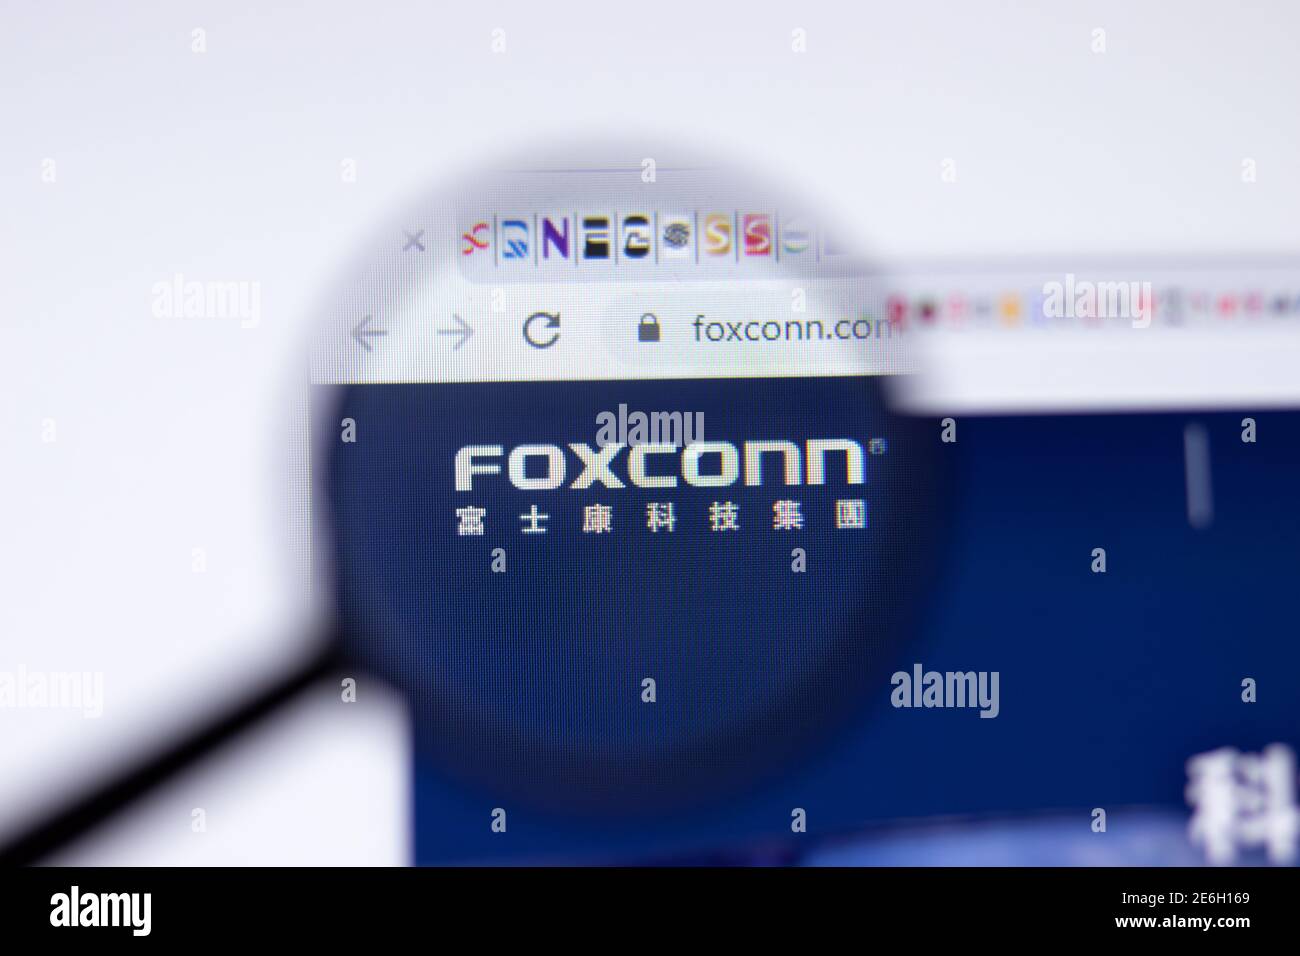 Saint Petersburg, Russia - 28 January 2021: Foxconn website page with logo close-up, Illustrative Editorial Stock Photo